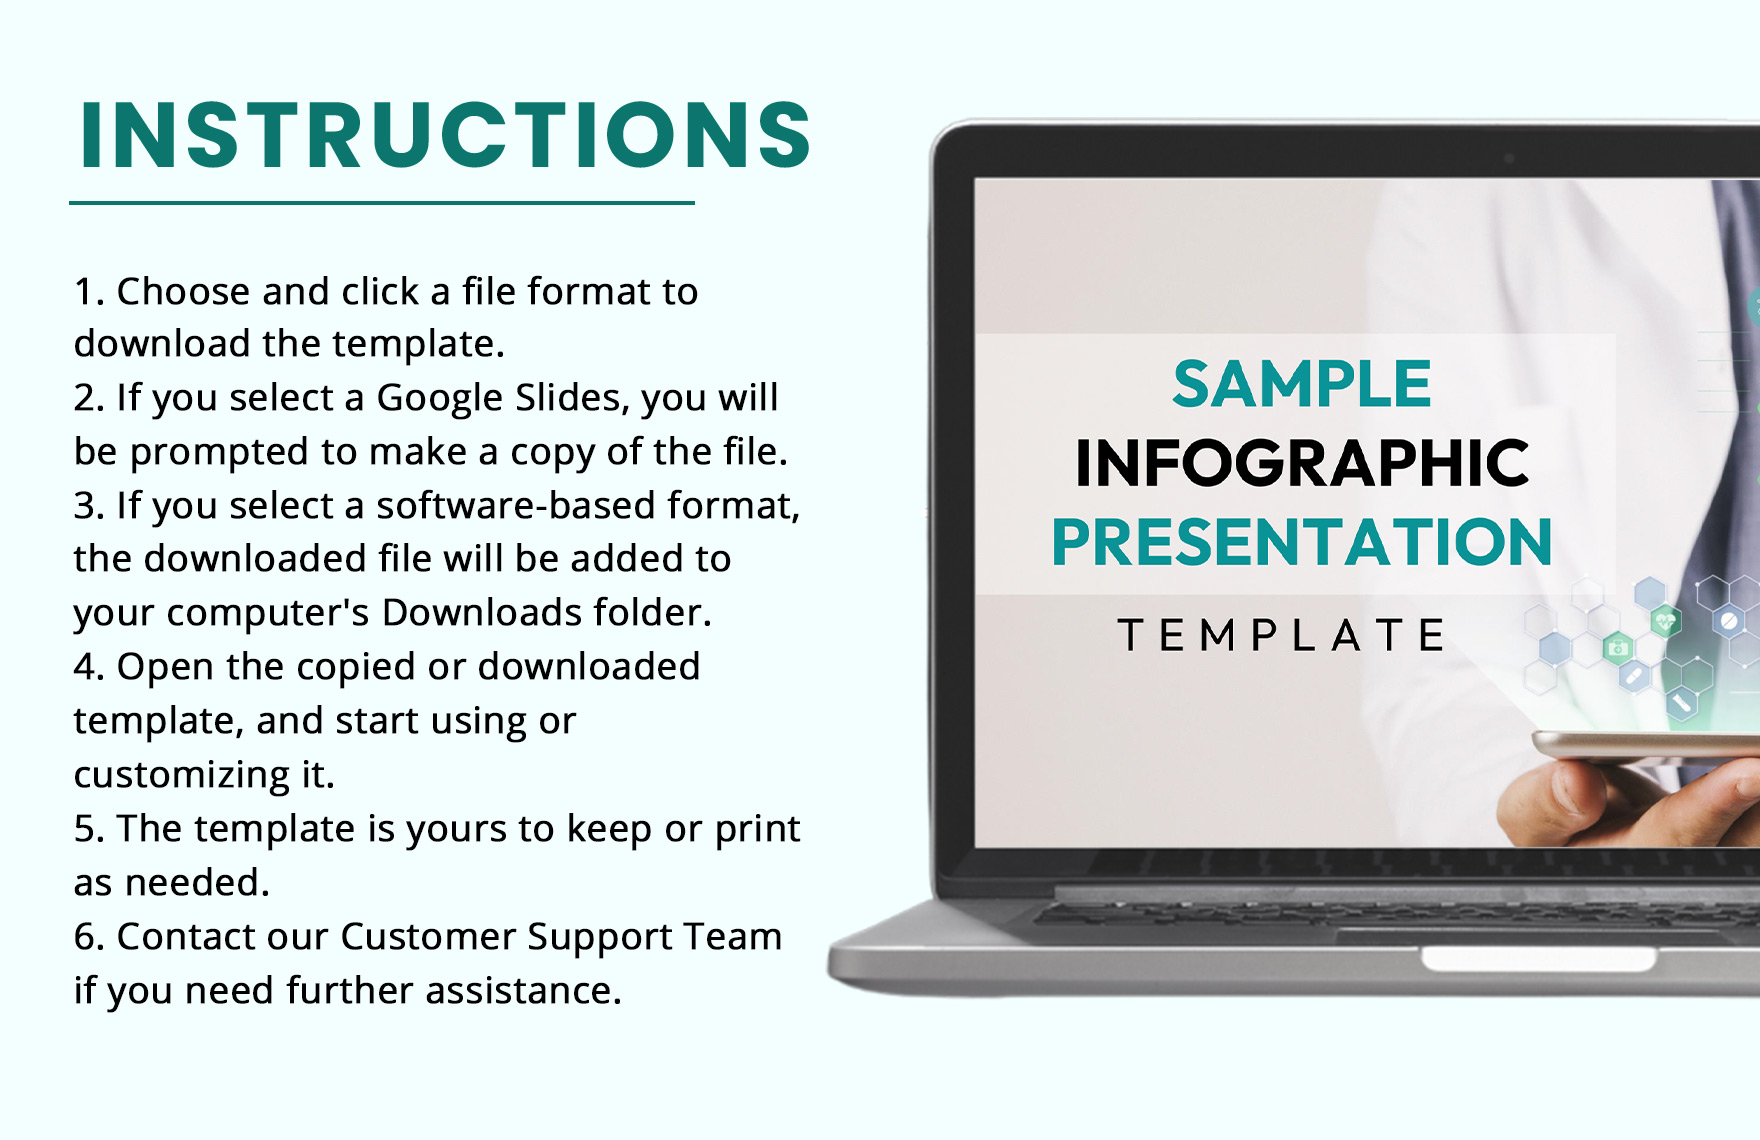 Sample Infographic Template